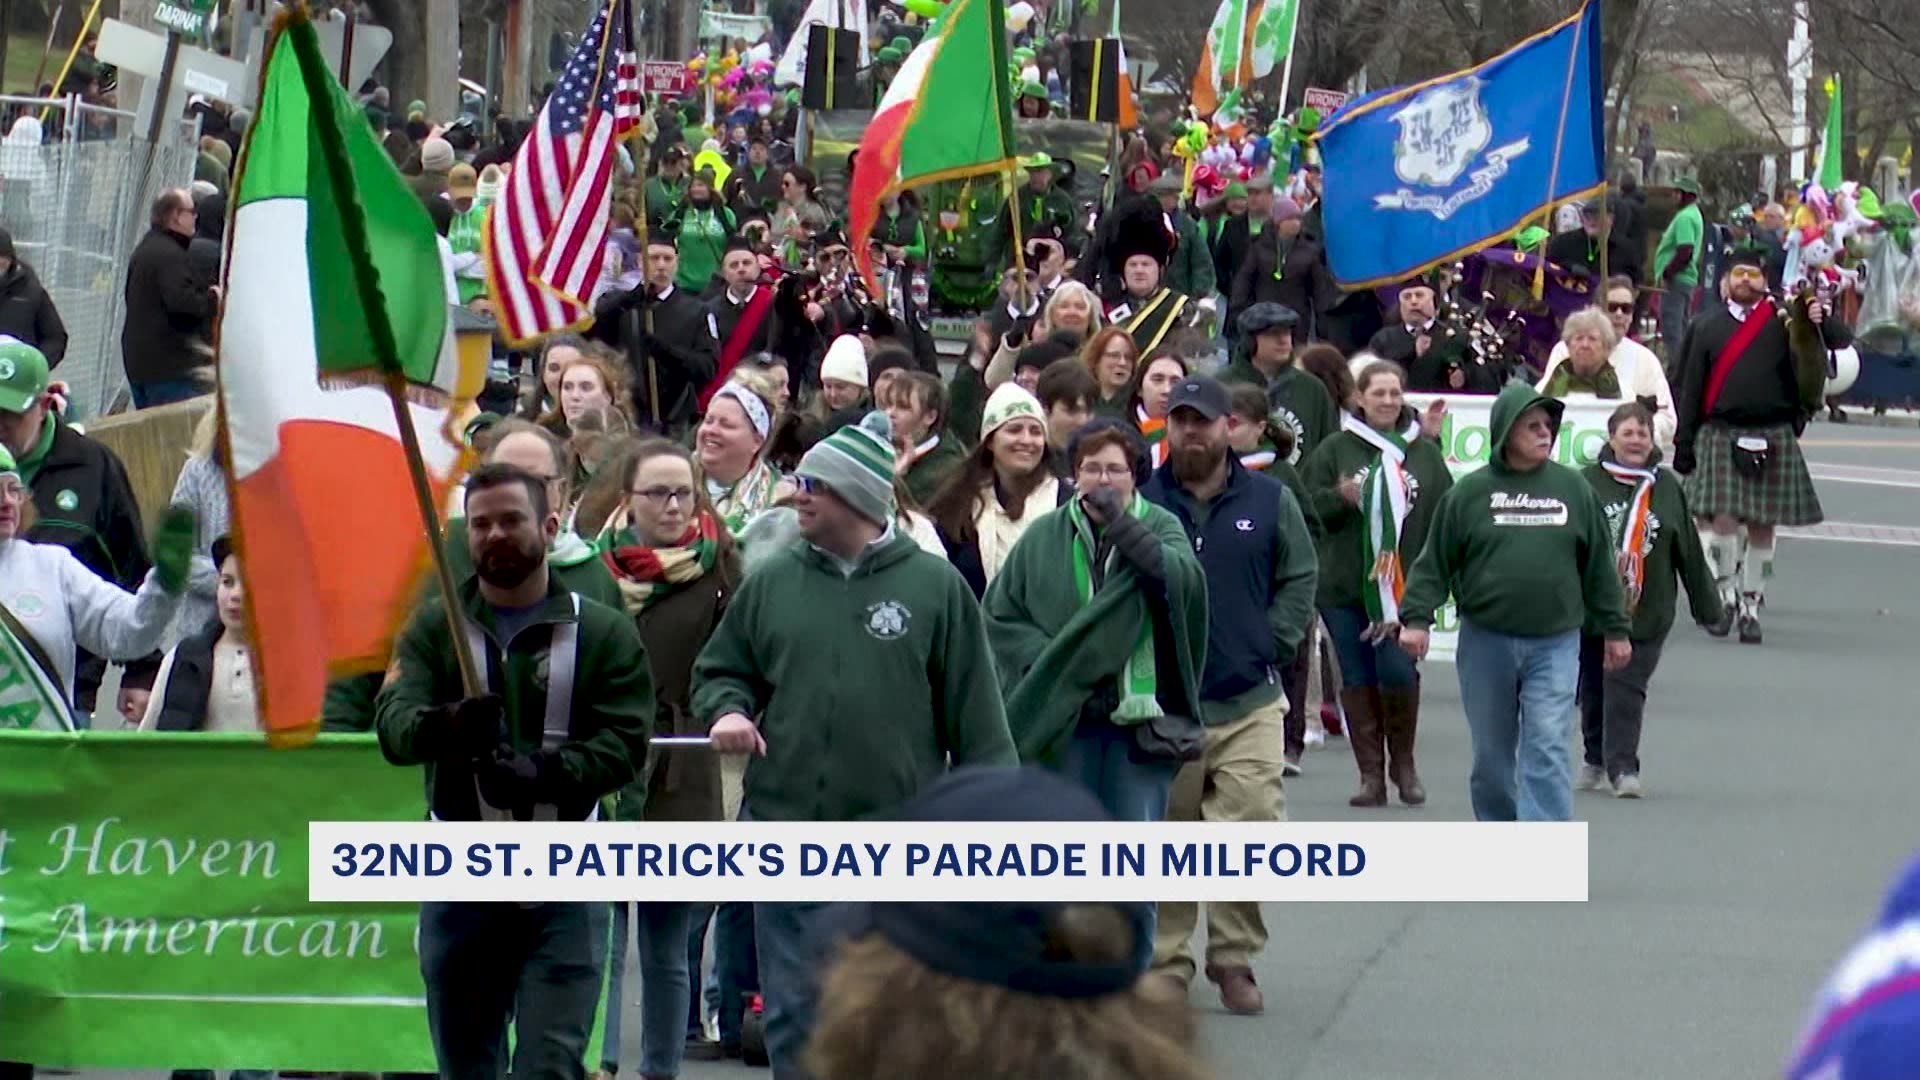 Annual Milford St. Patrick's Day Parade held Saturday